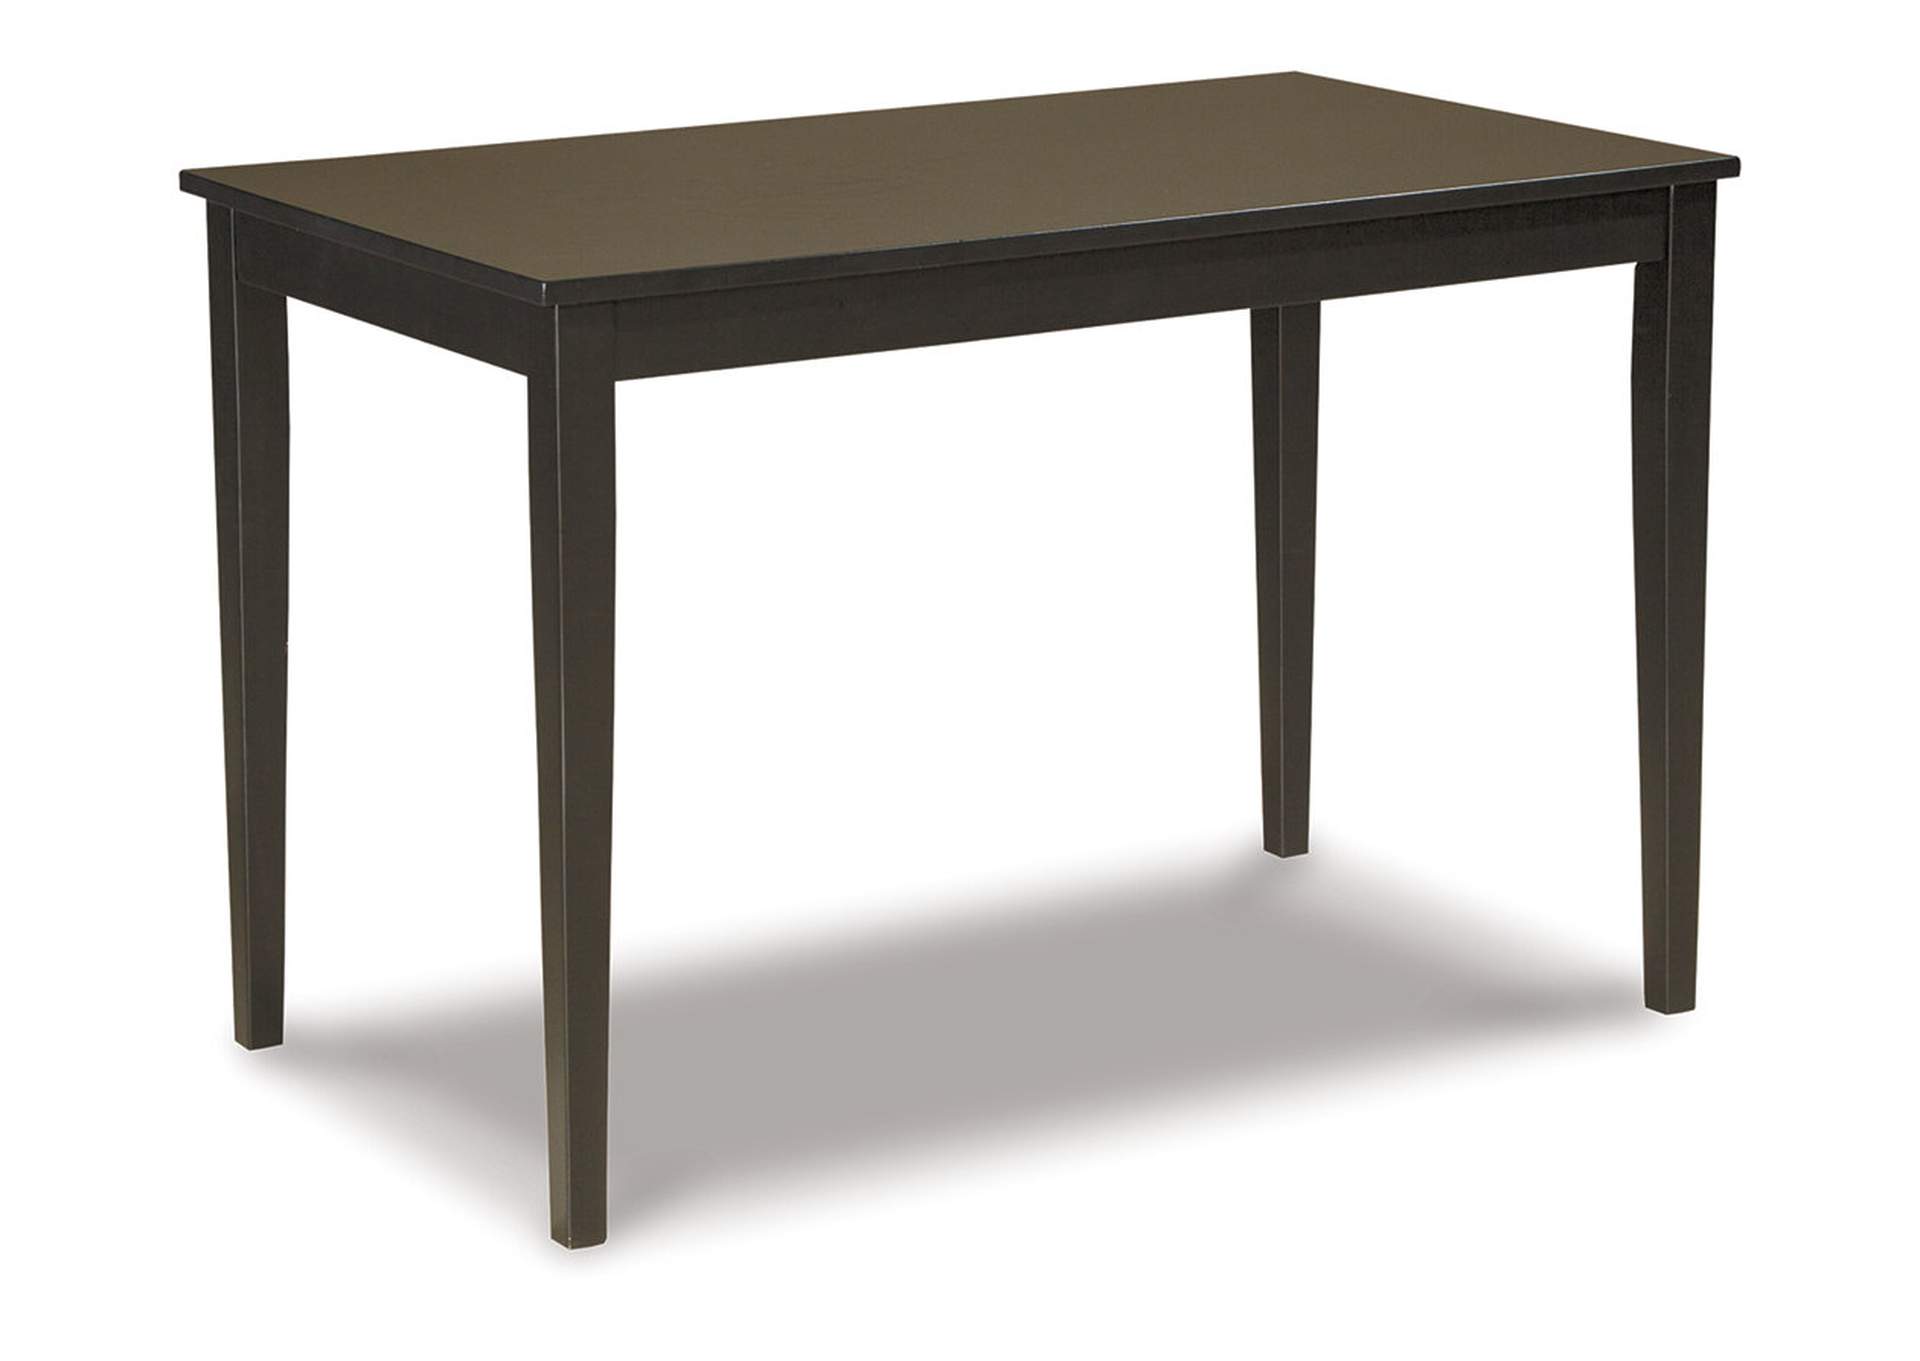 Kimonte Dining Room Table